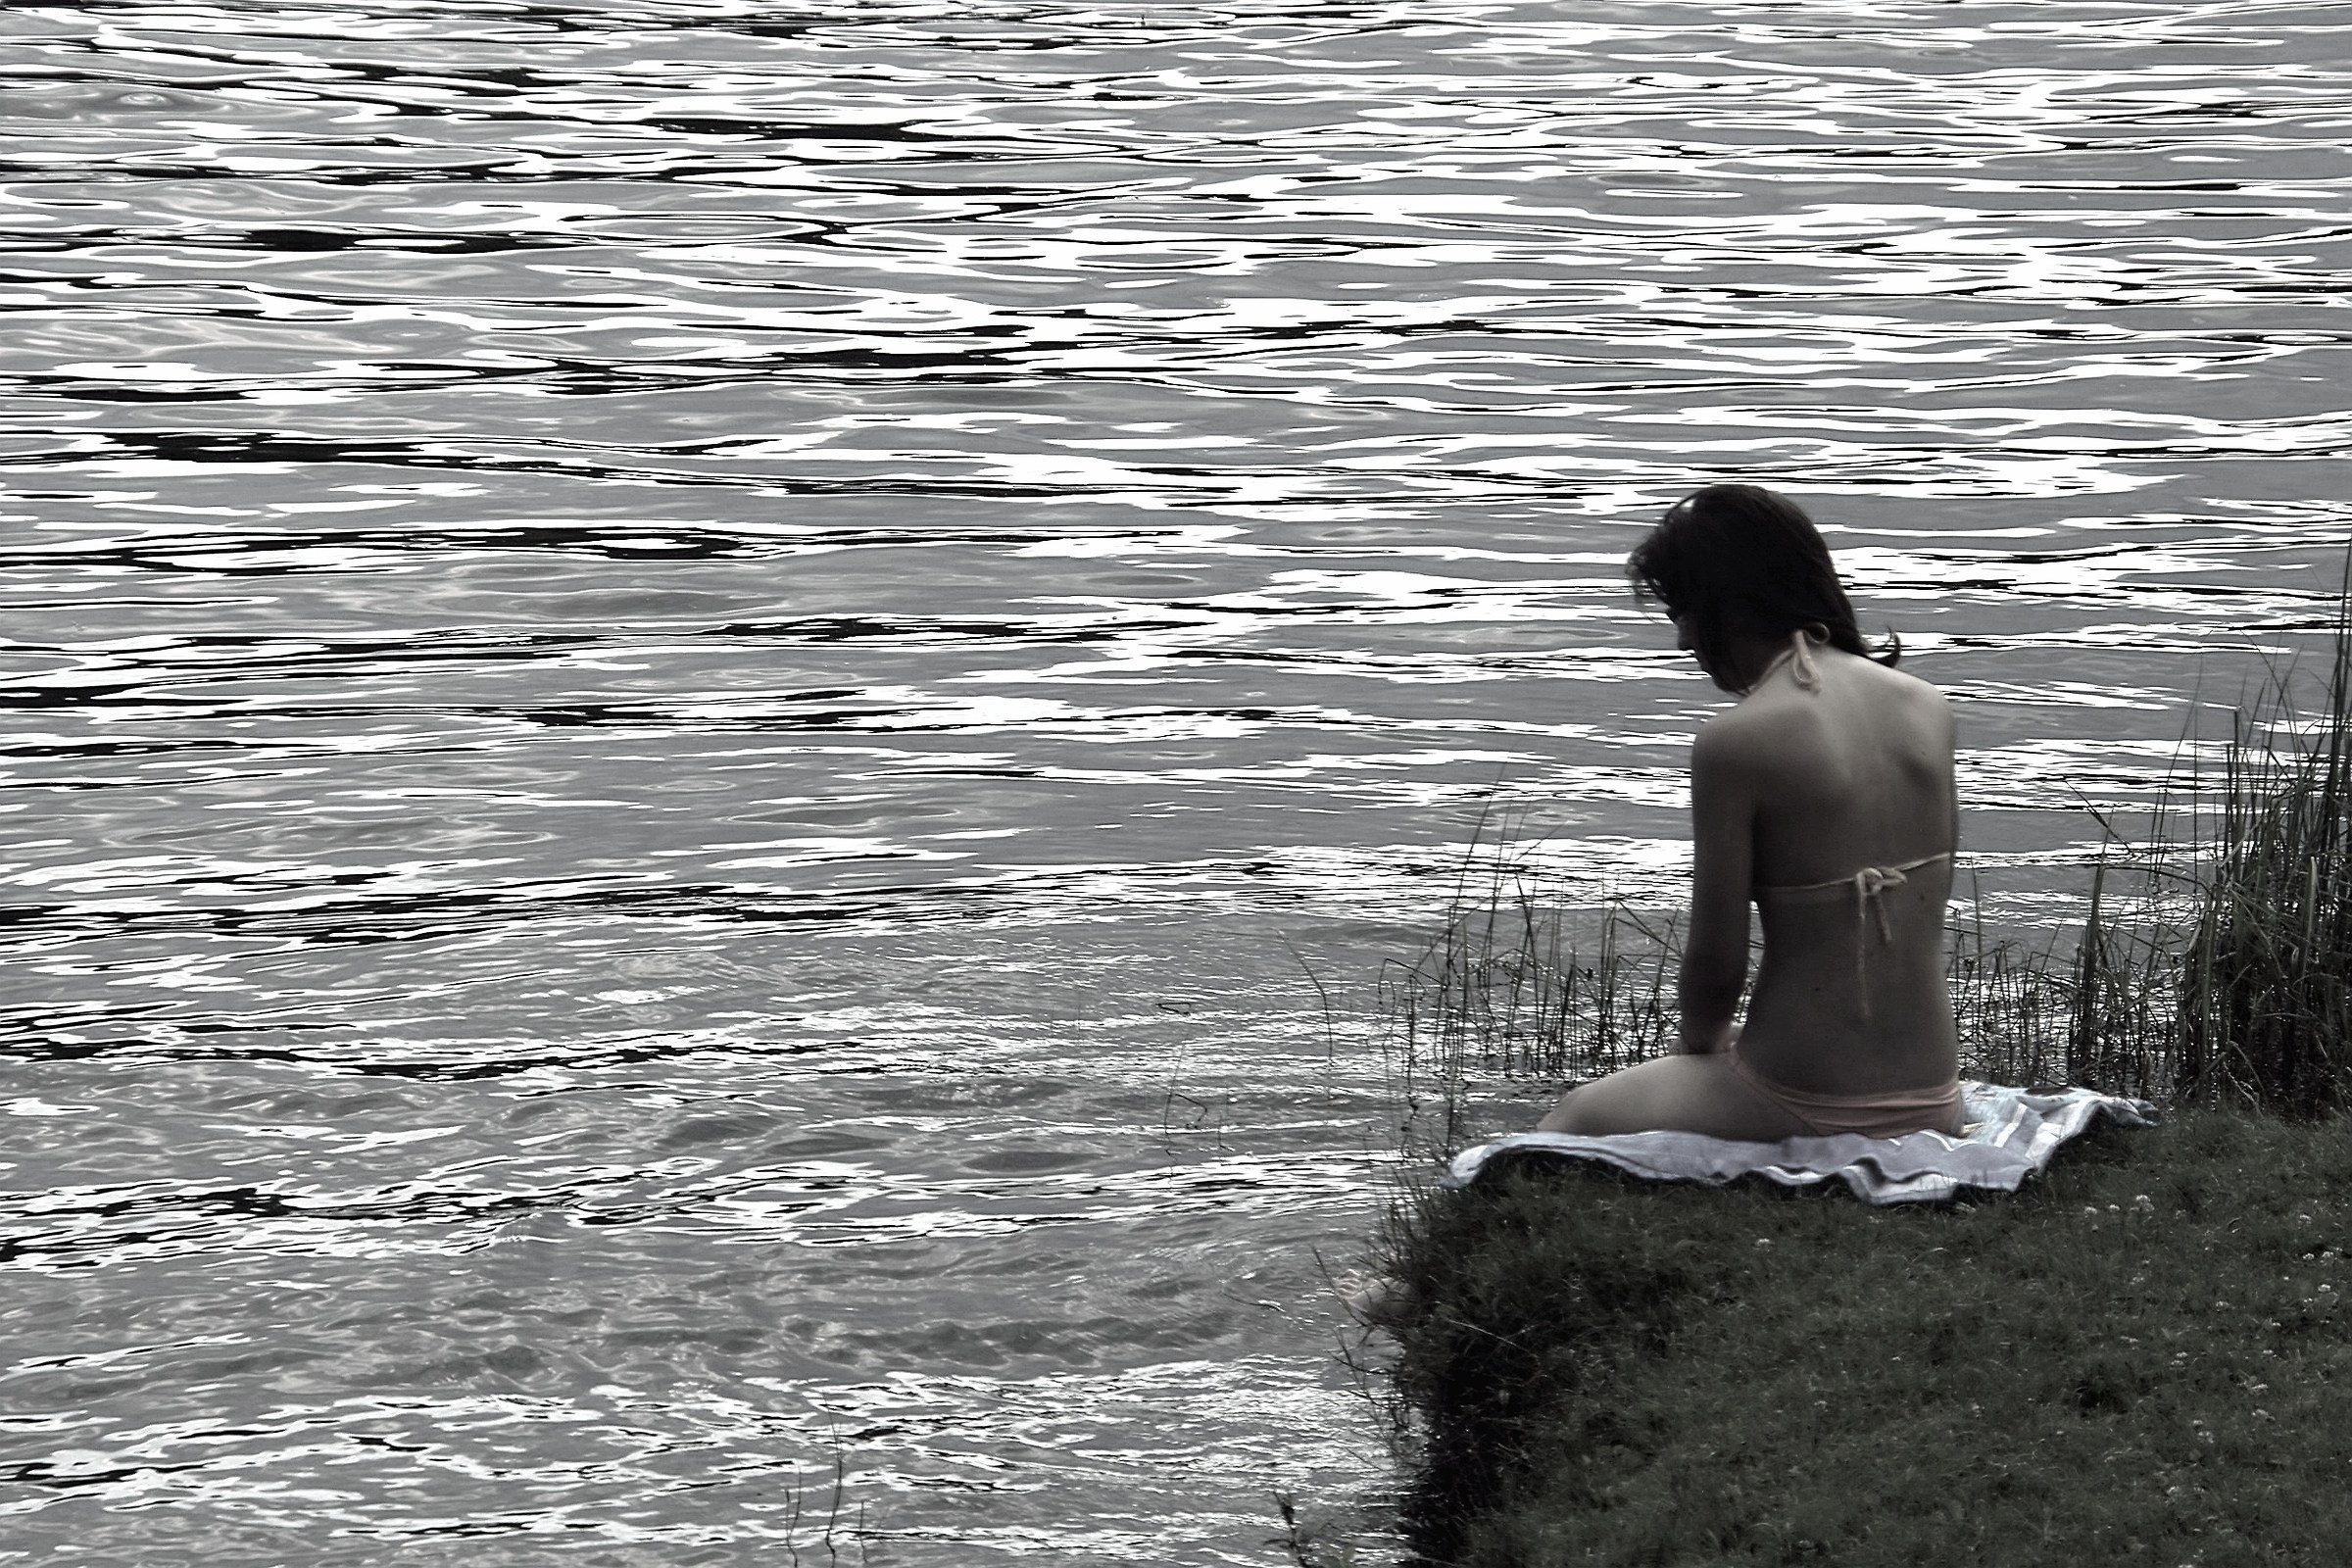 the bather absorbed...